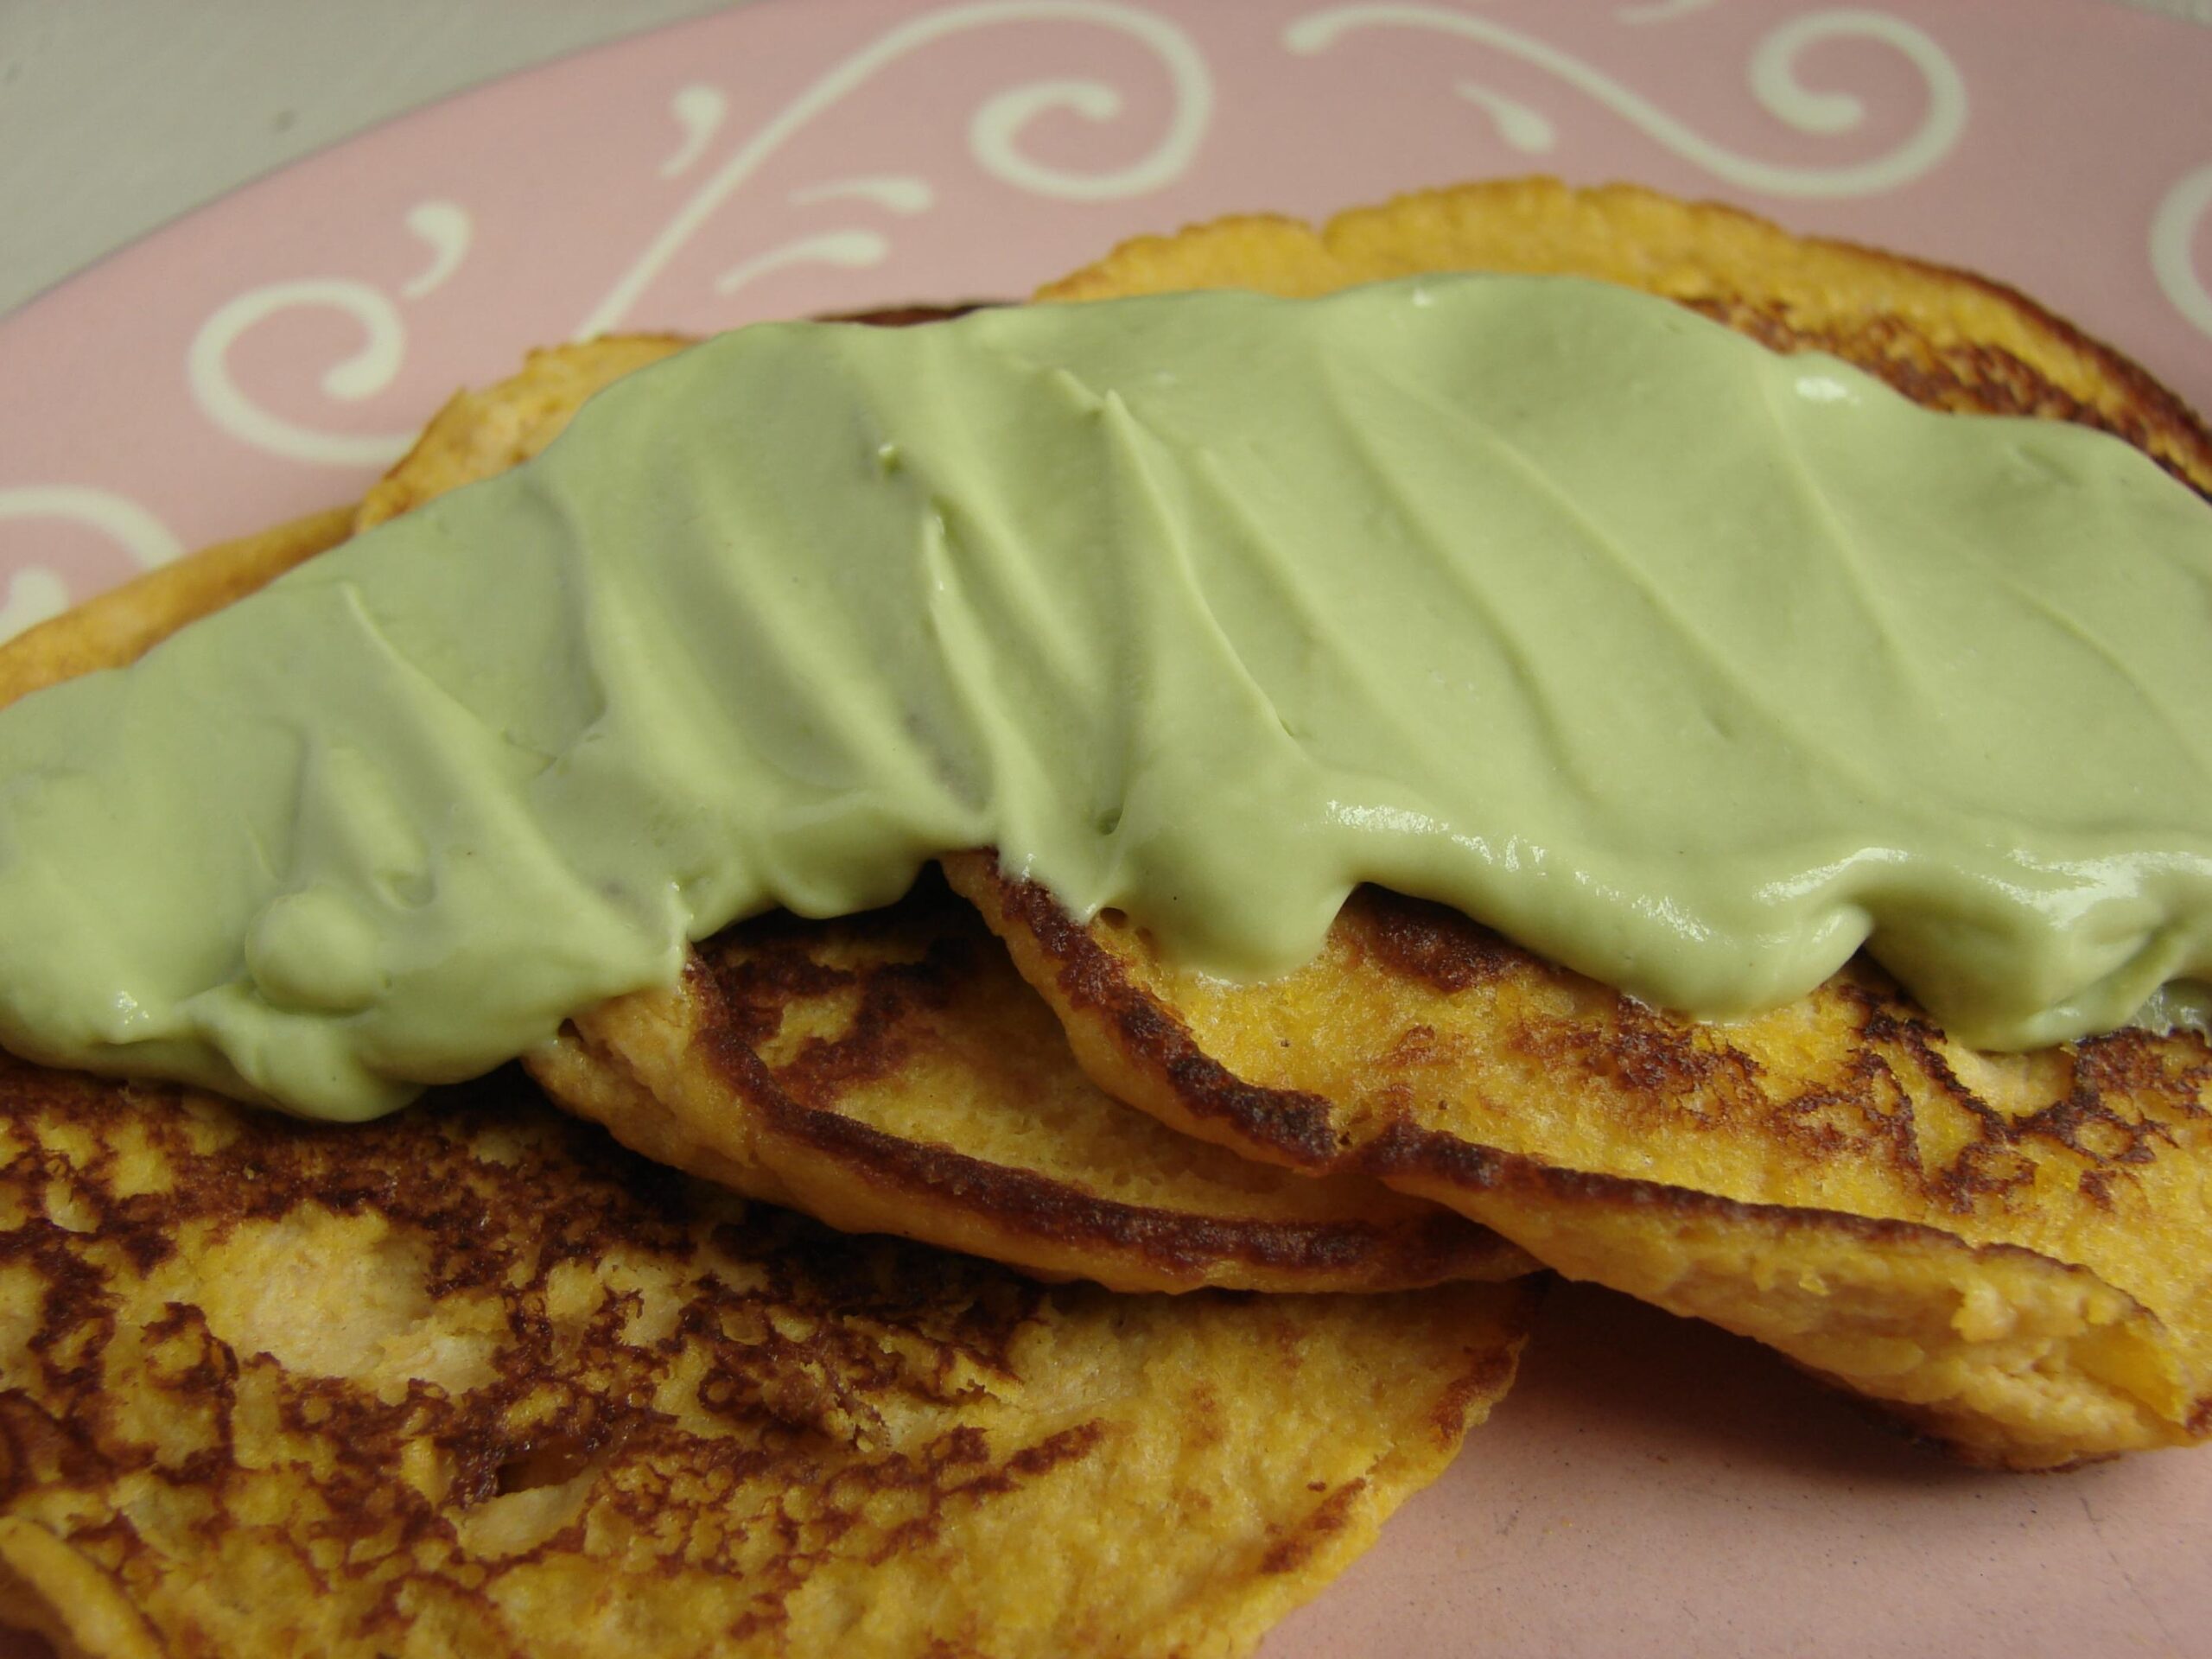  Who needs regular pancakes when you can have these savory, protein-packed pancakes?